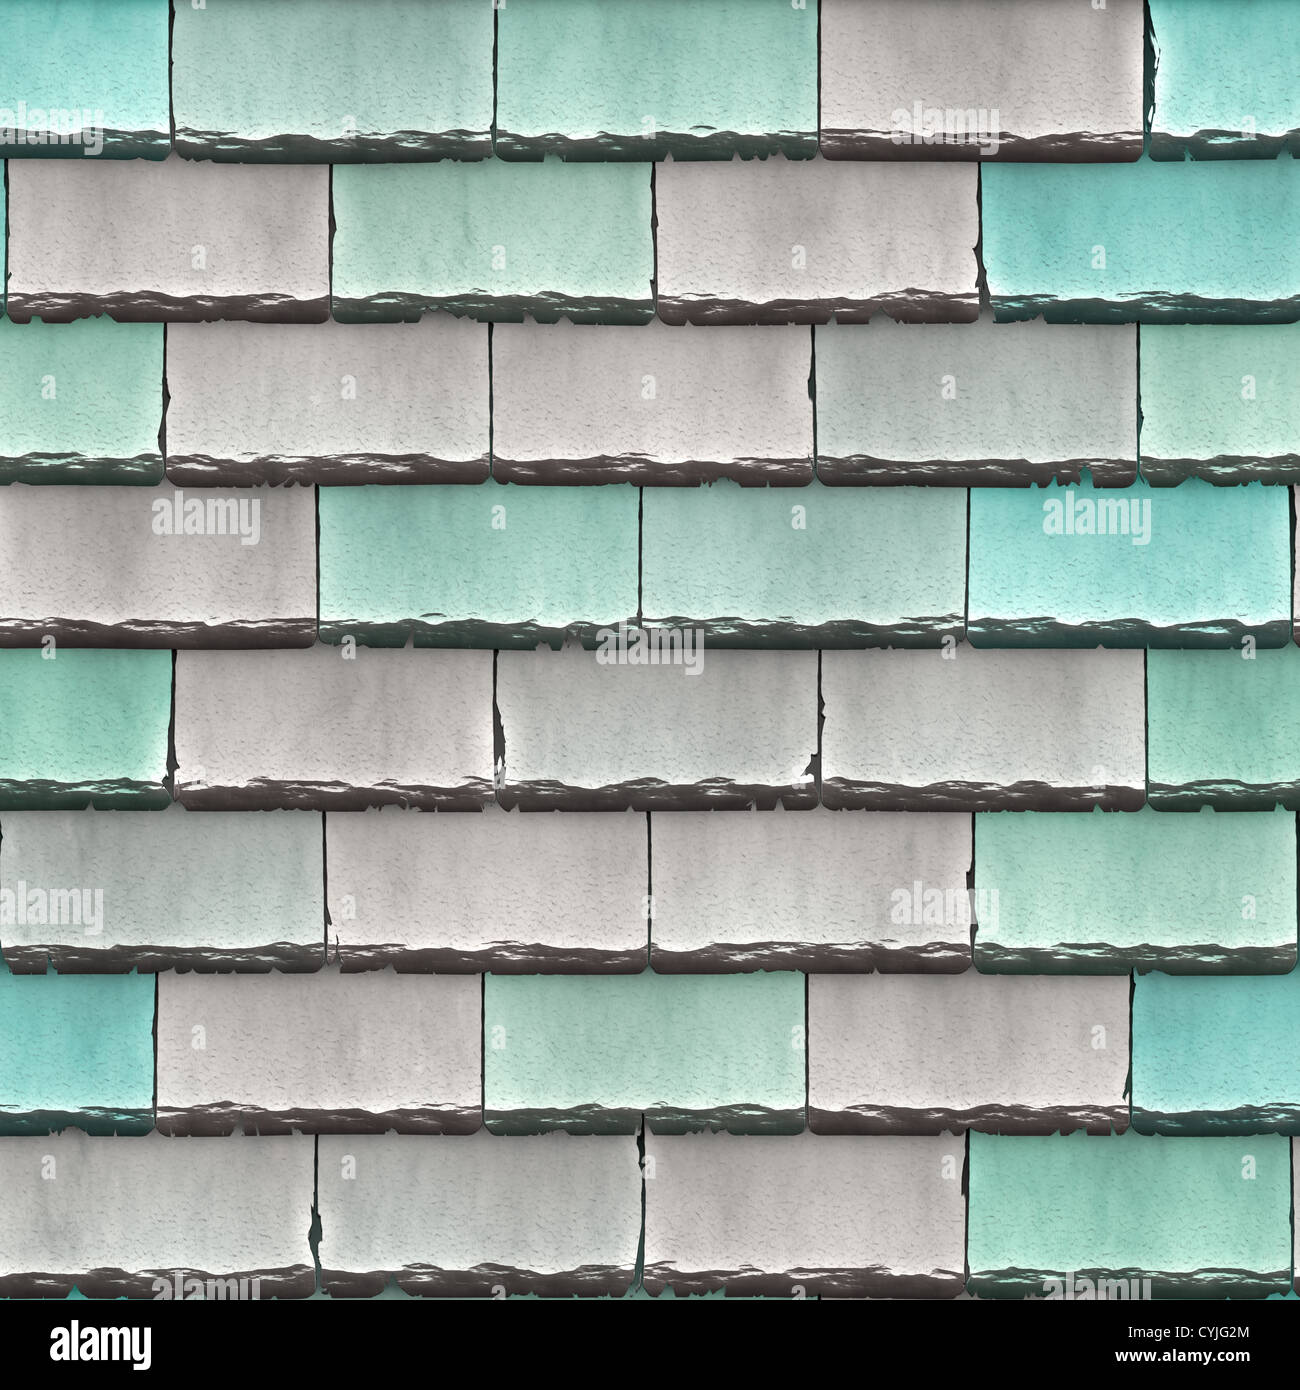 High quality seamless roof shingles background Stock Photo